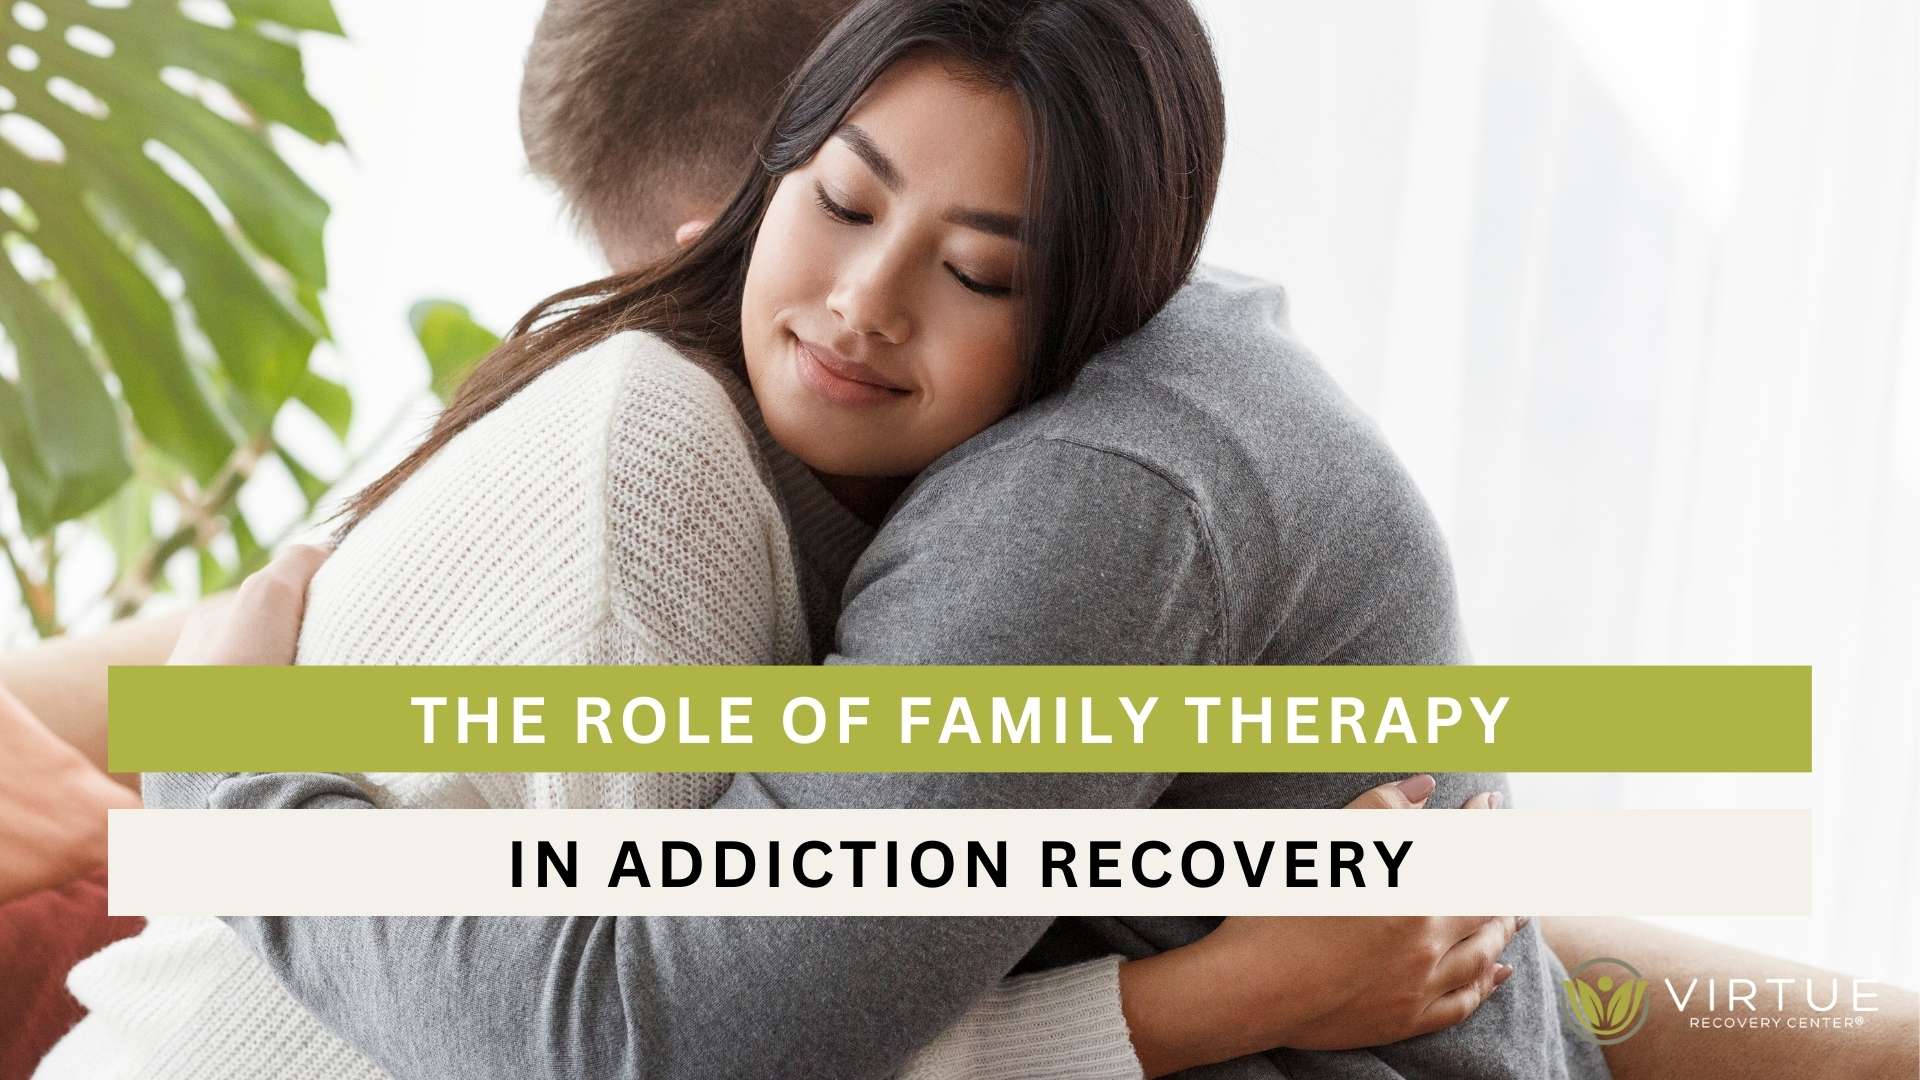 The Role of Family Therapy in Addiction Recovery